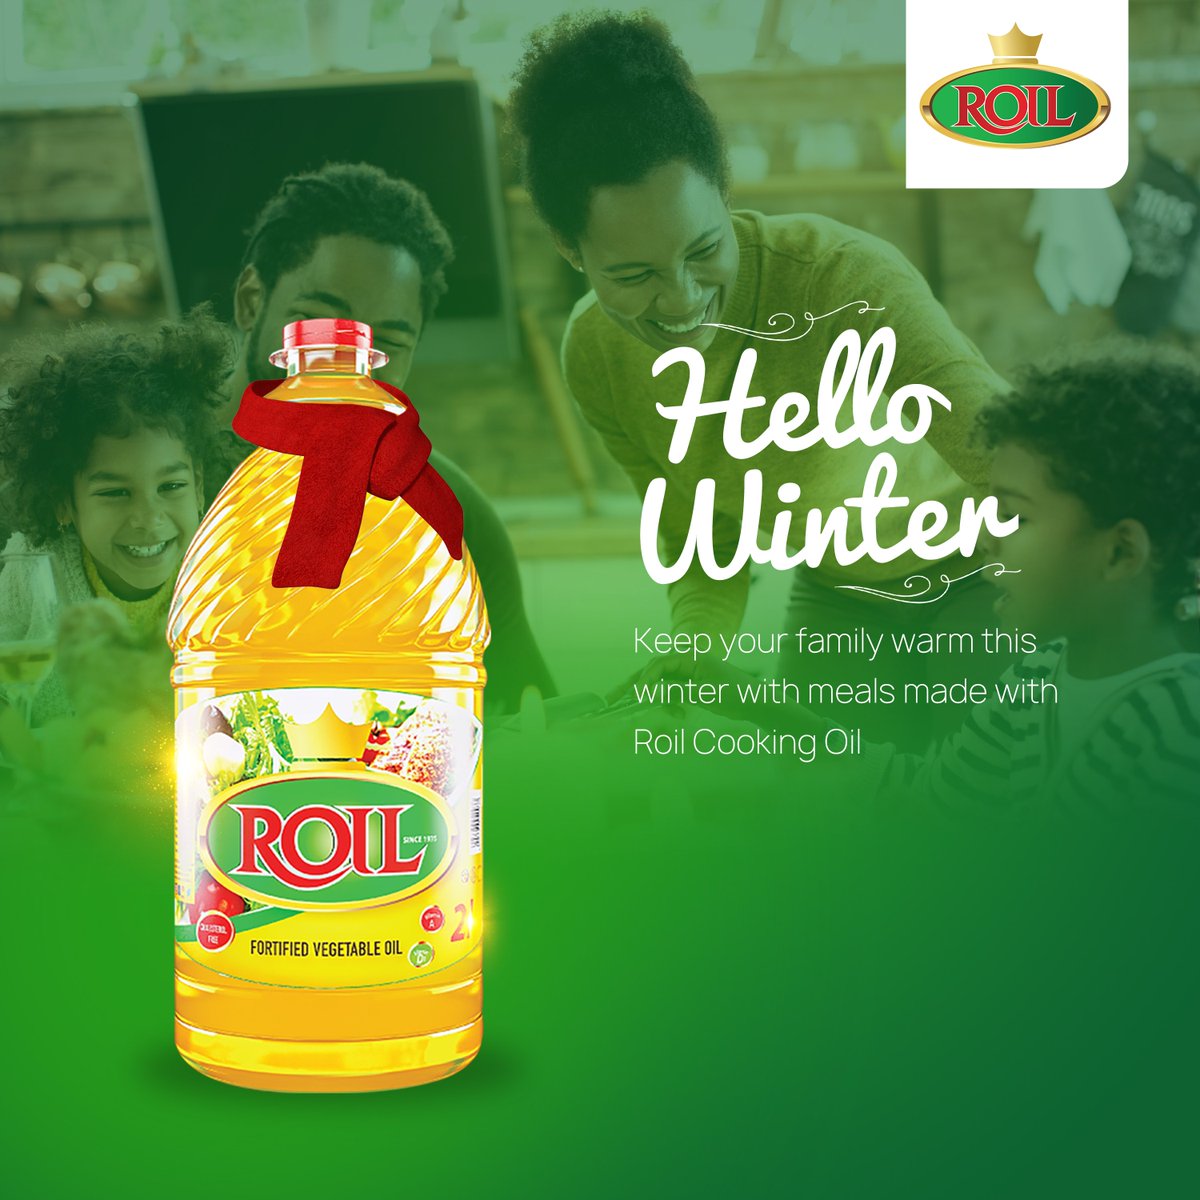 Hello Winter! Keep your family warm this winter with meals made with Roil Cooking Oil. #roilcookingoil #unitedrefinerieslimited @BusisaMoyo